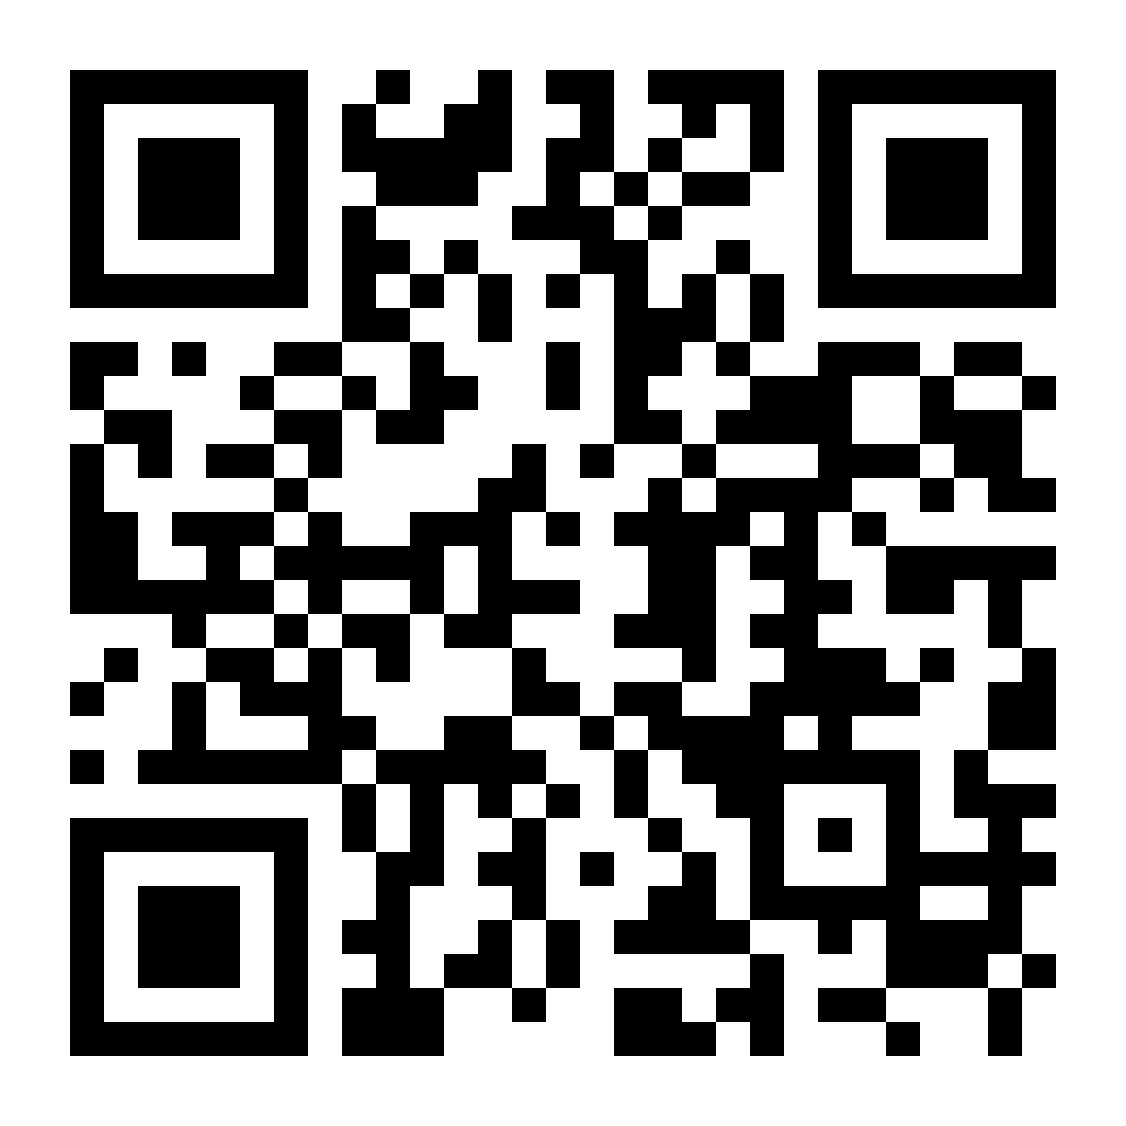 Scan the QR code and connect the cashback